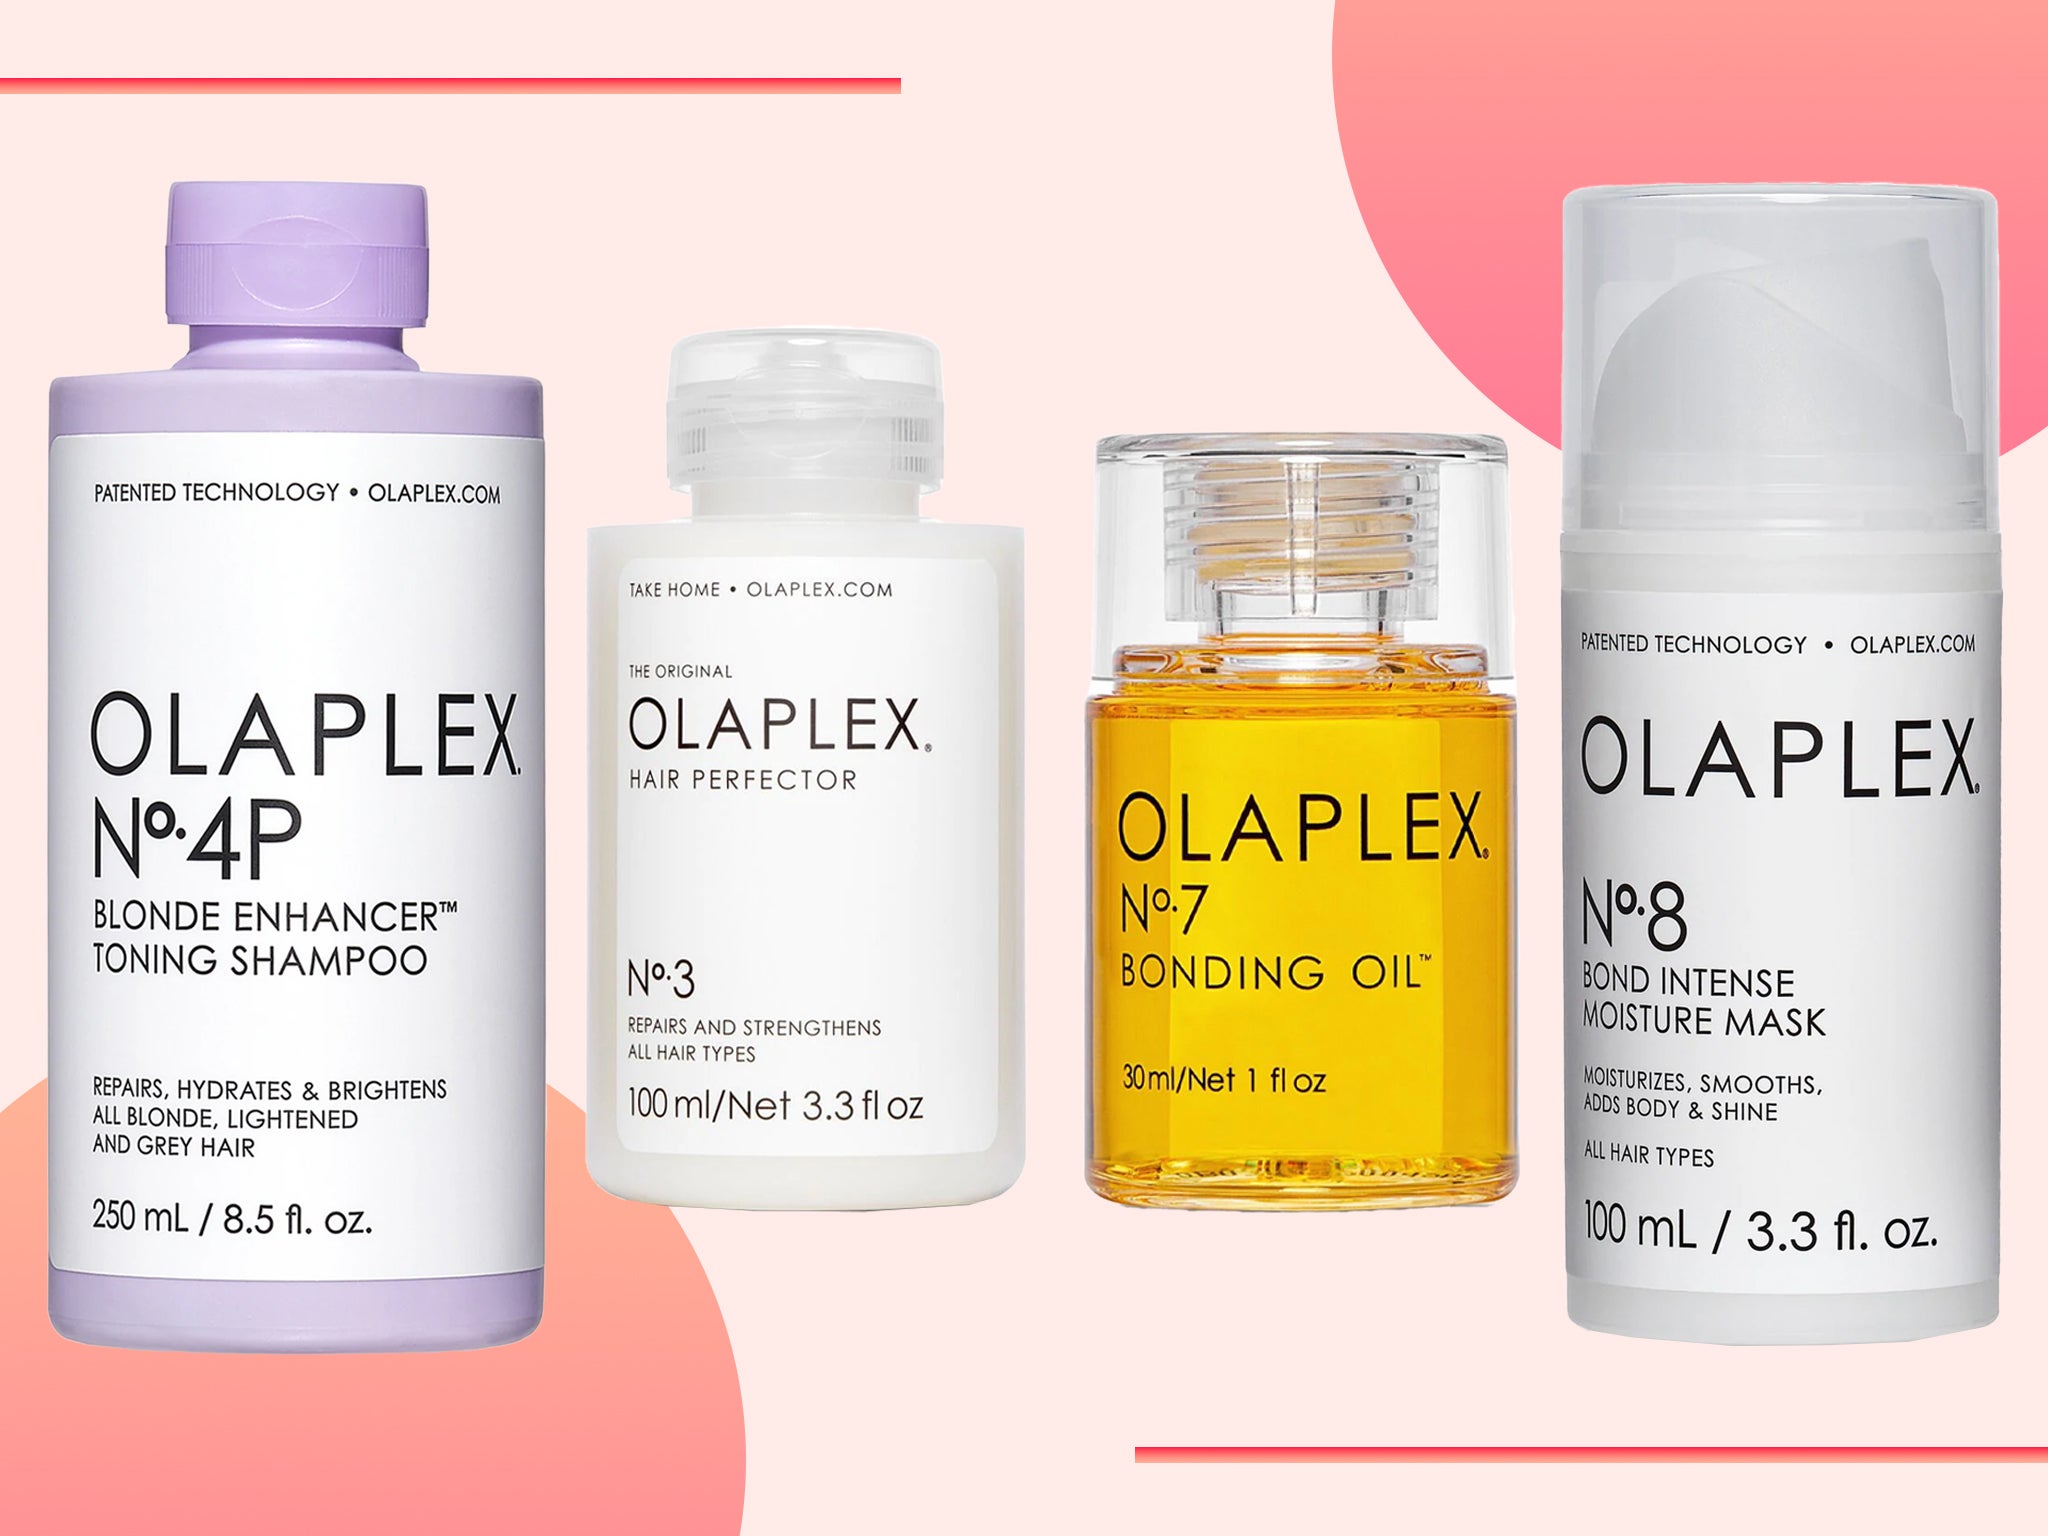 Olaplex review: hair products repaired my damaged locks | The Independent